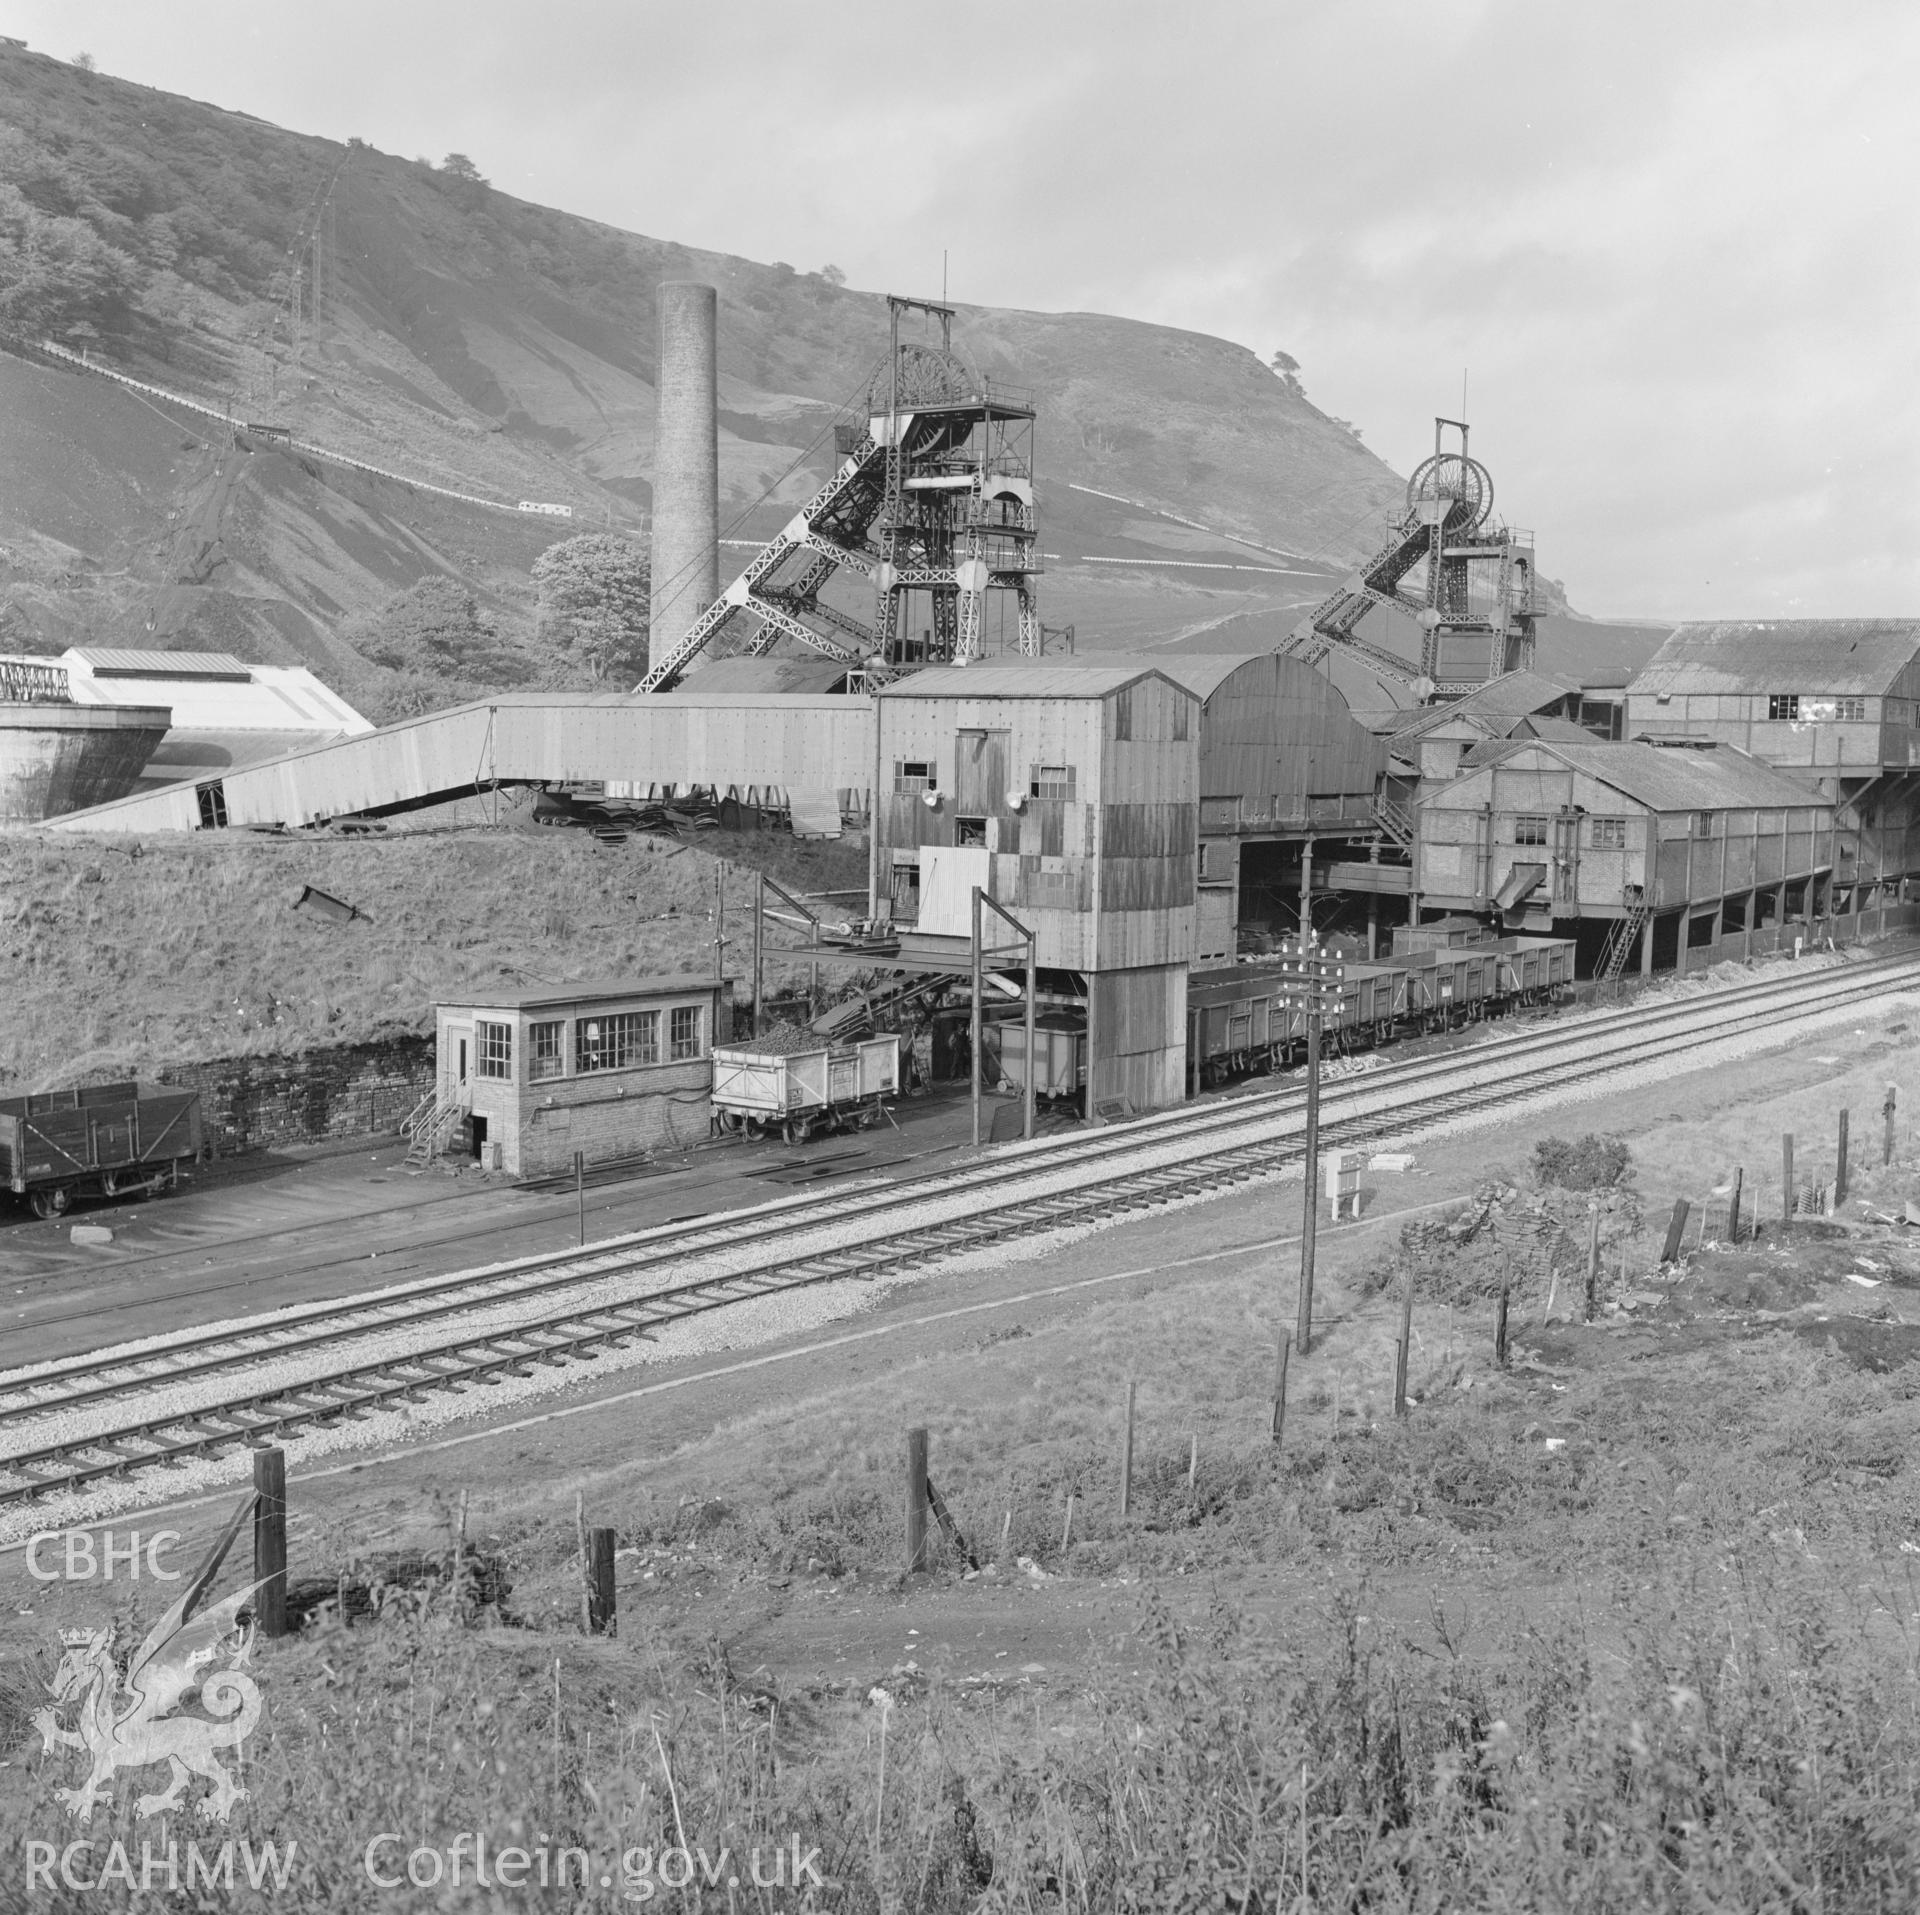 Digital copy of an acetate negative showing general view of Marine Colliery, from the John Cornwell Collection.